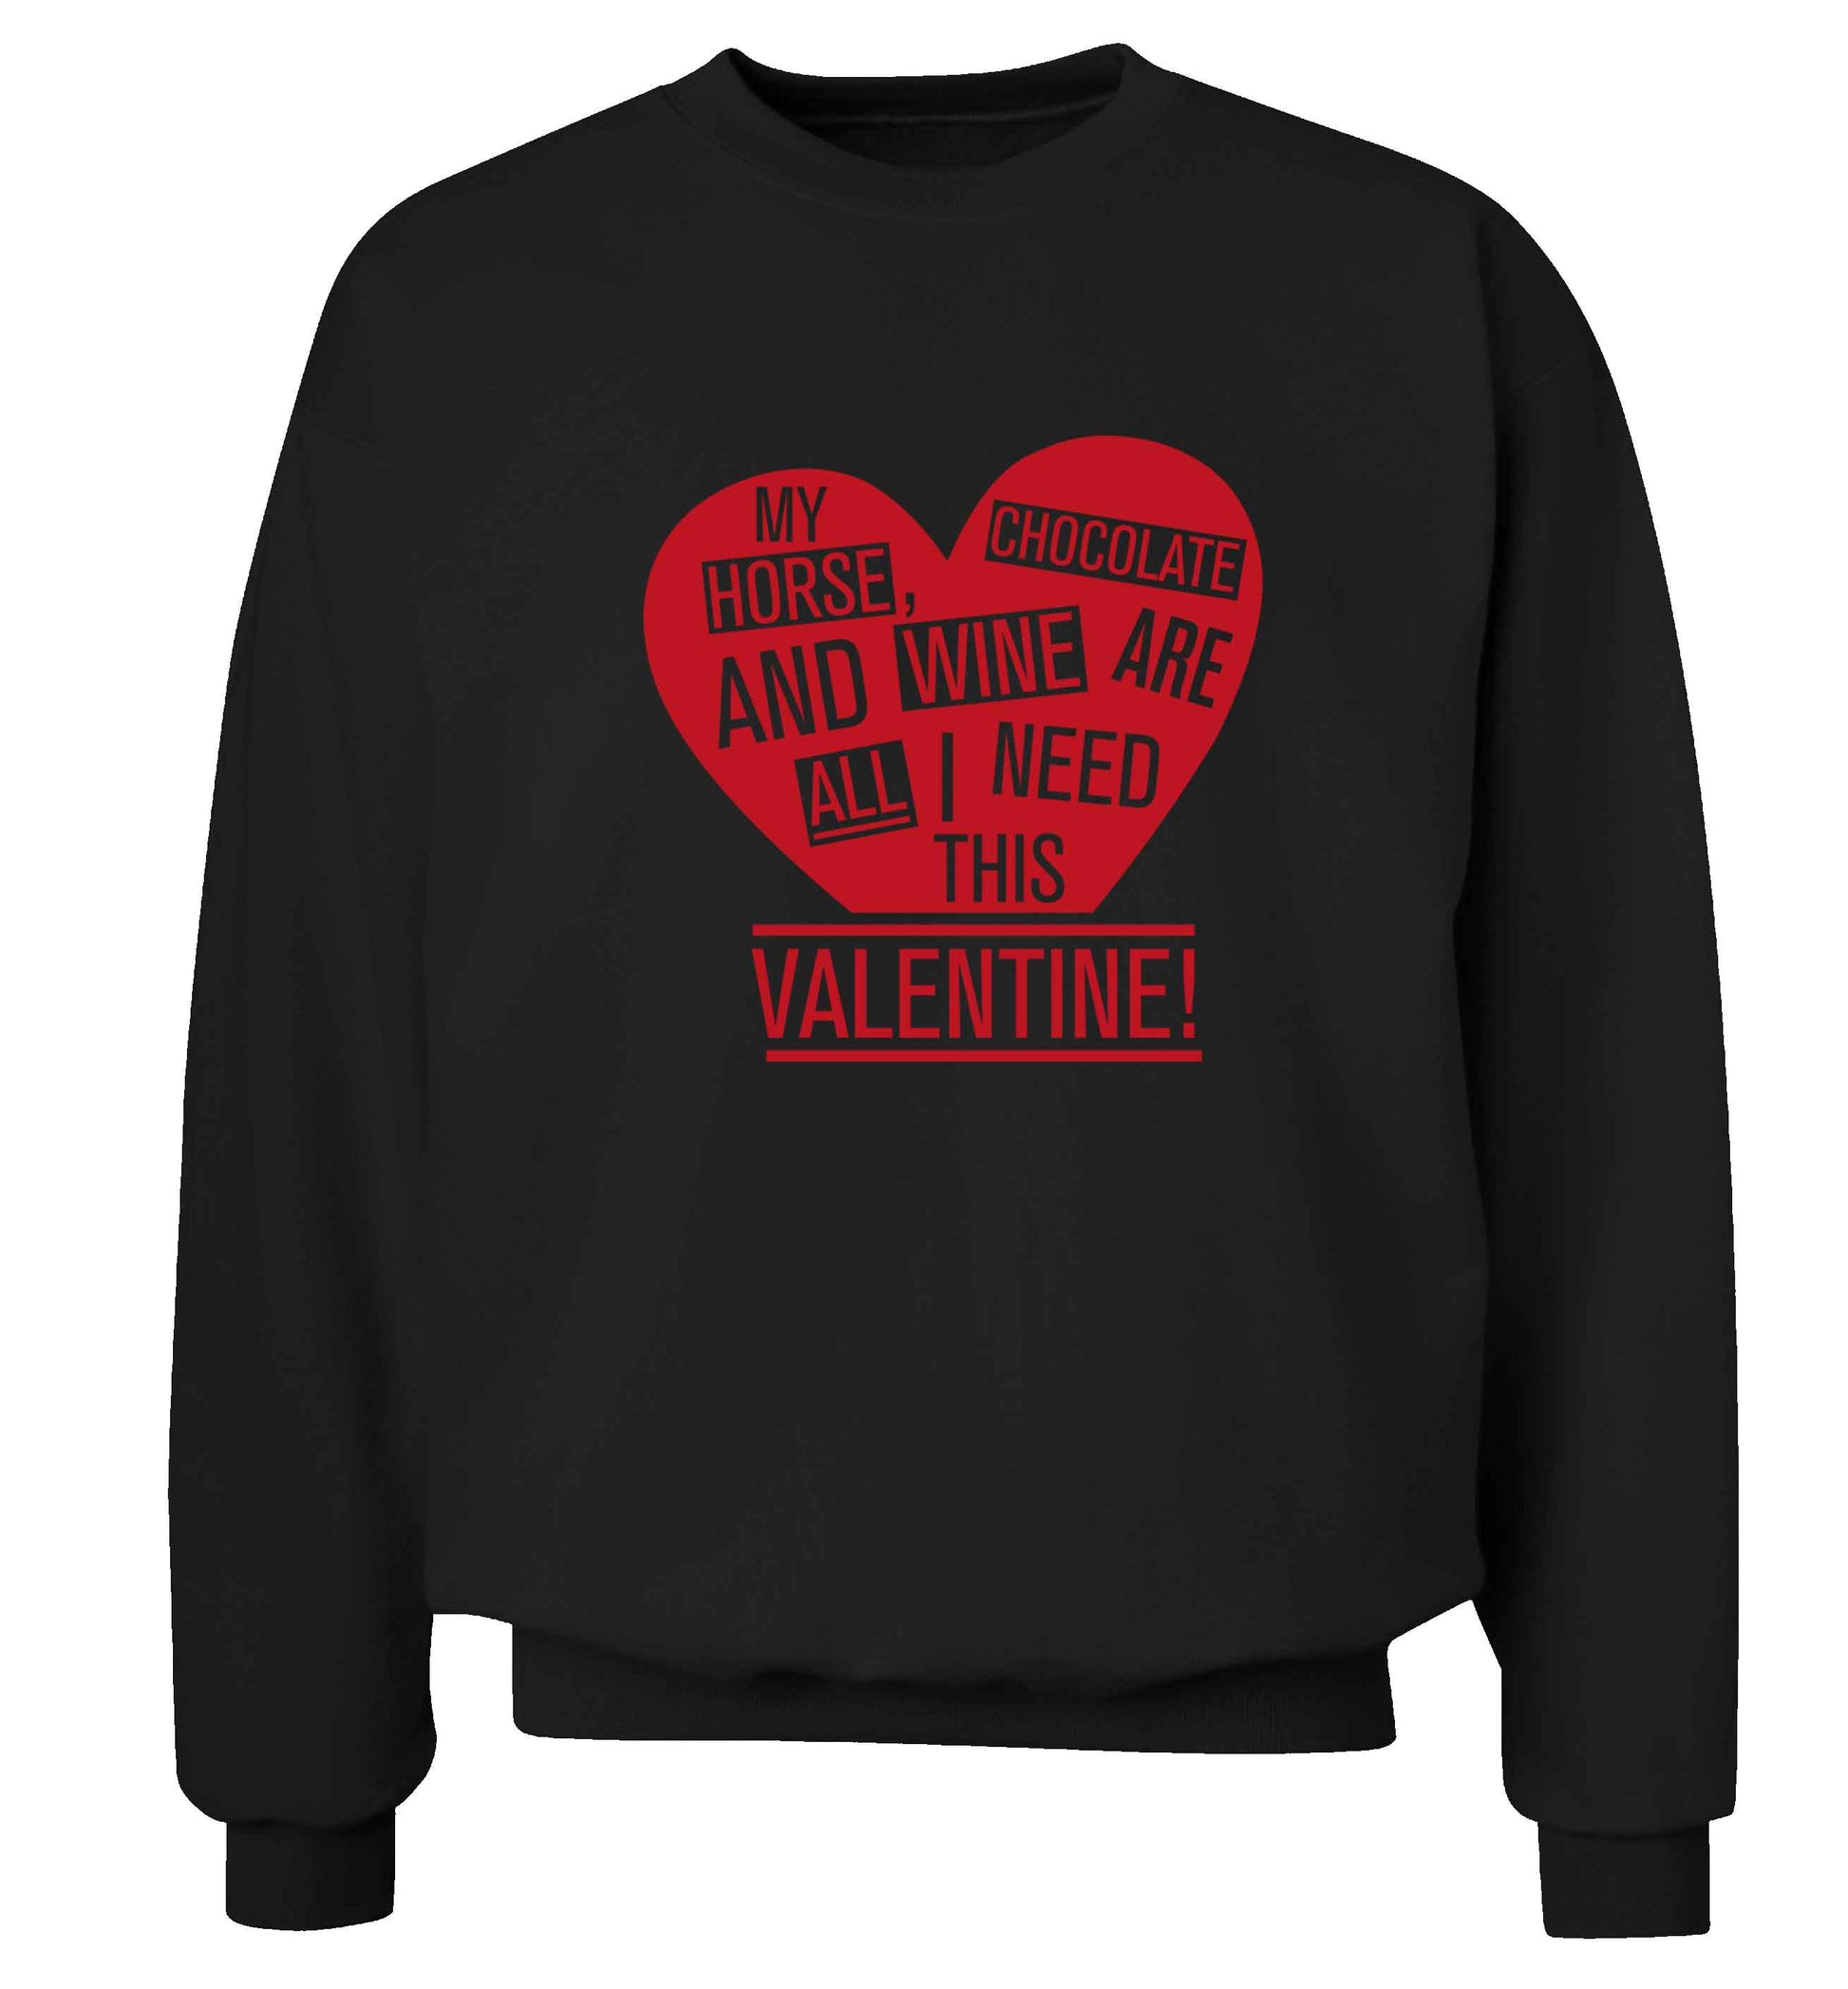 My horse chocolate and wine are all I need this valentine adult's unisex black sweater 2XL